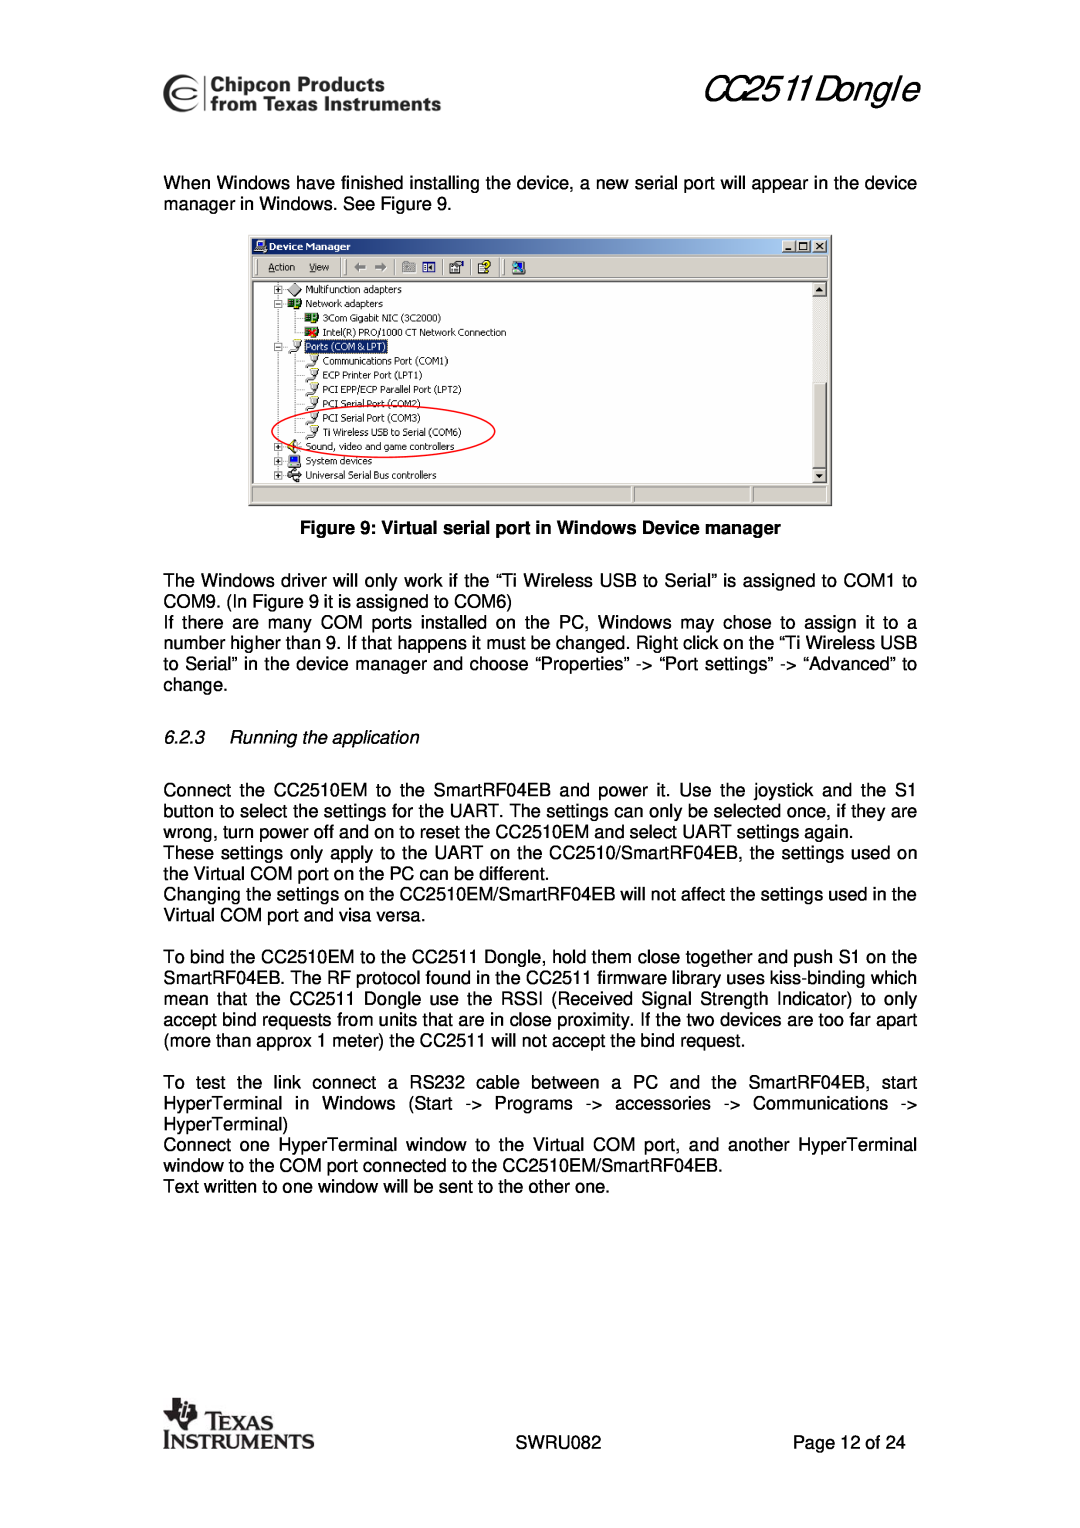 Texas Instruments user manual Virtual serial port in Windows Device manager, Running the application, CC2511 Dongle 